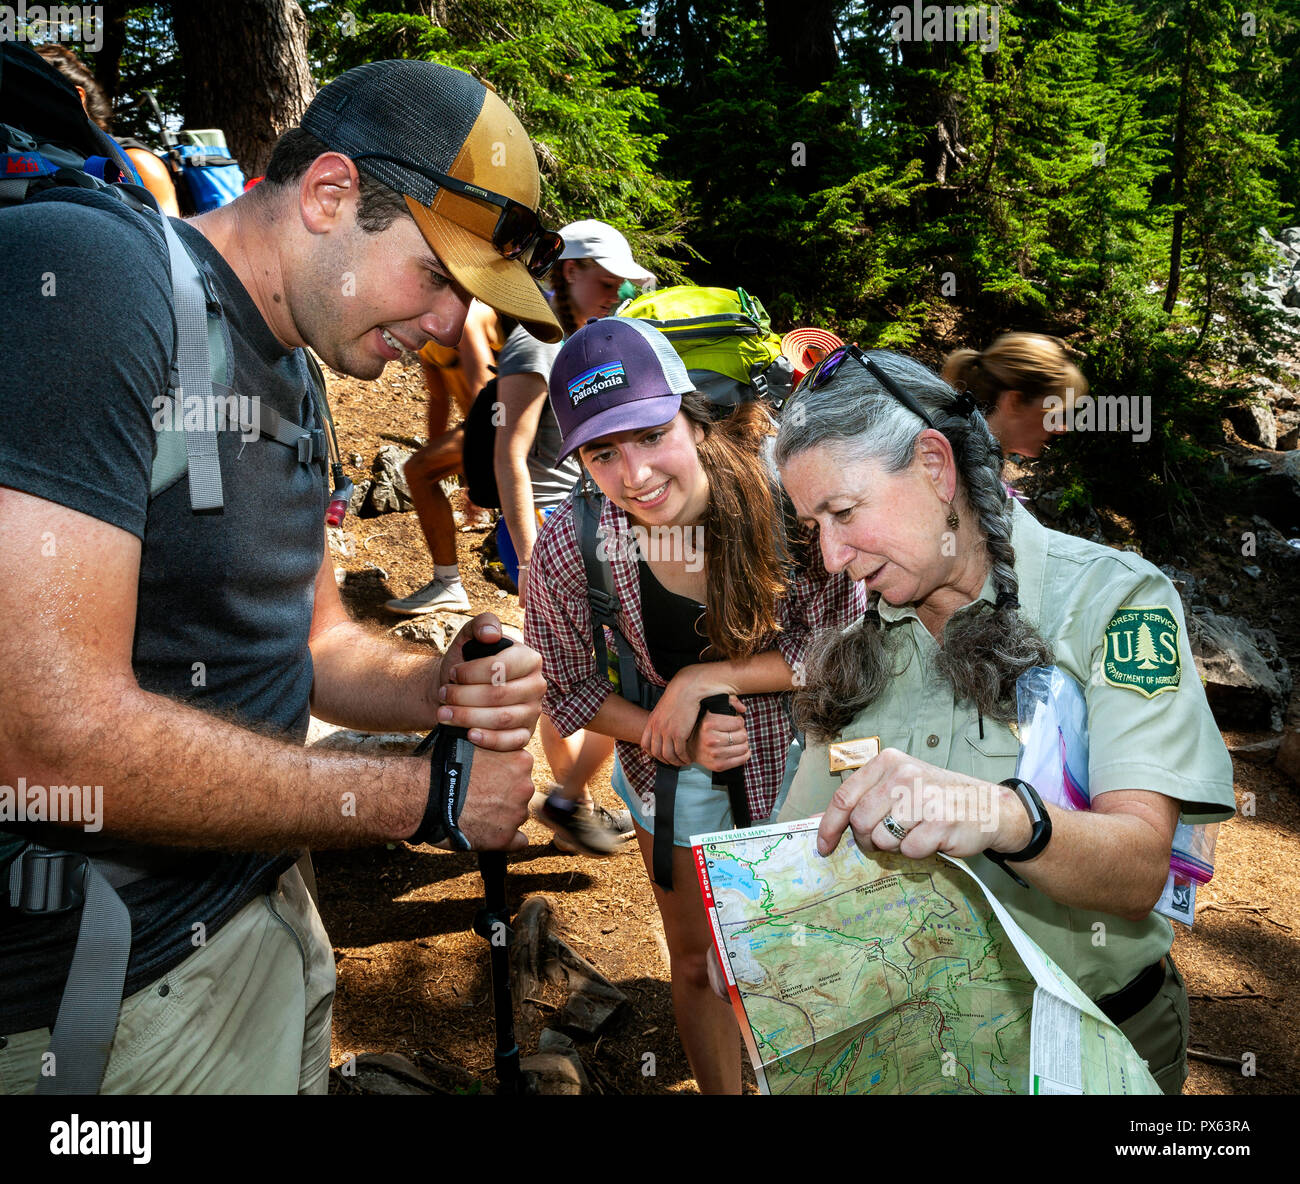 WA14857-00...WASHINGTON - National Forest Service Volunteer Jane-Ellen Avery Seymour shows backpackers alternitive camping locations on a map along Sn Stock Photo